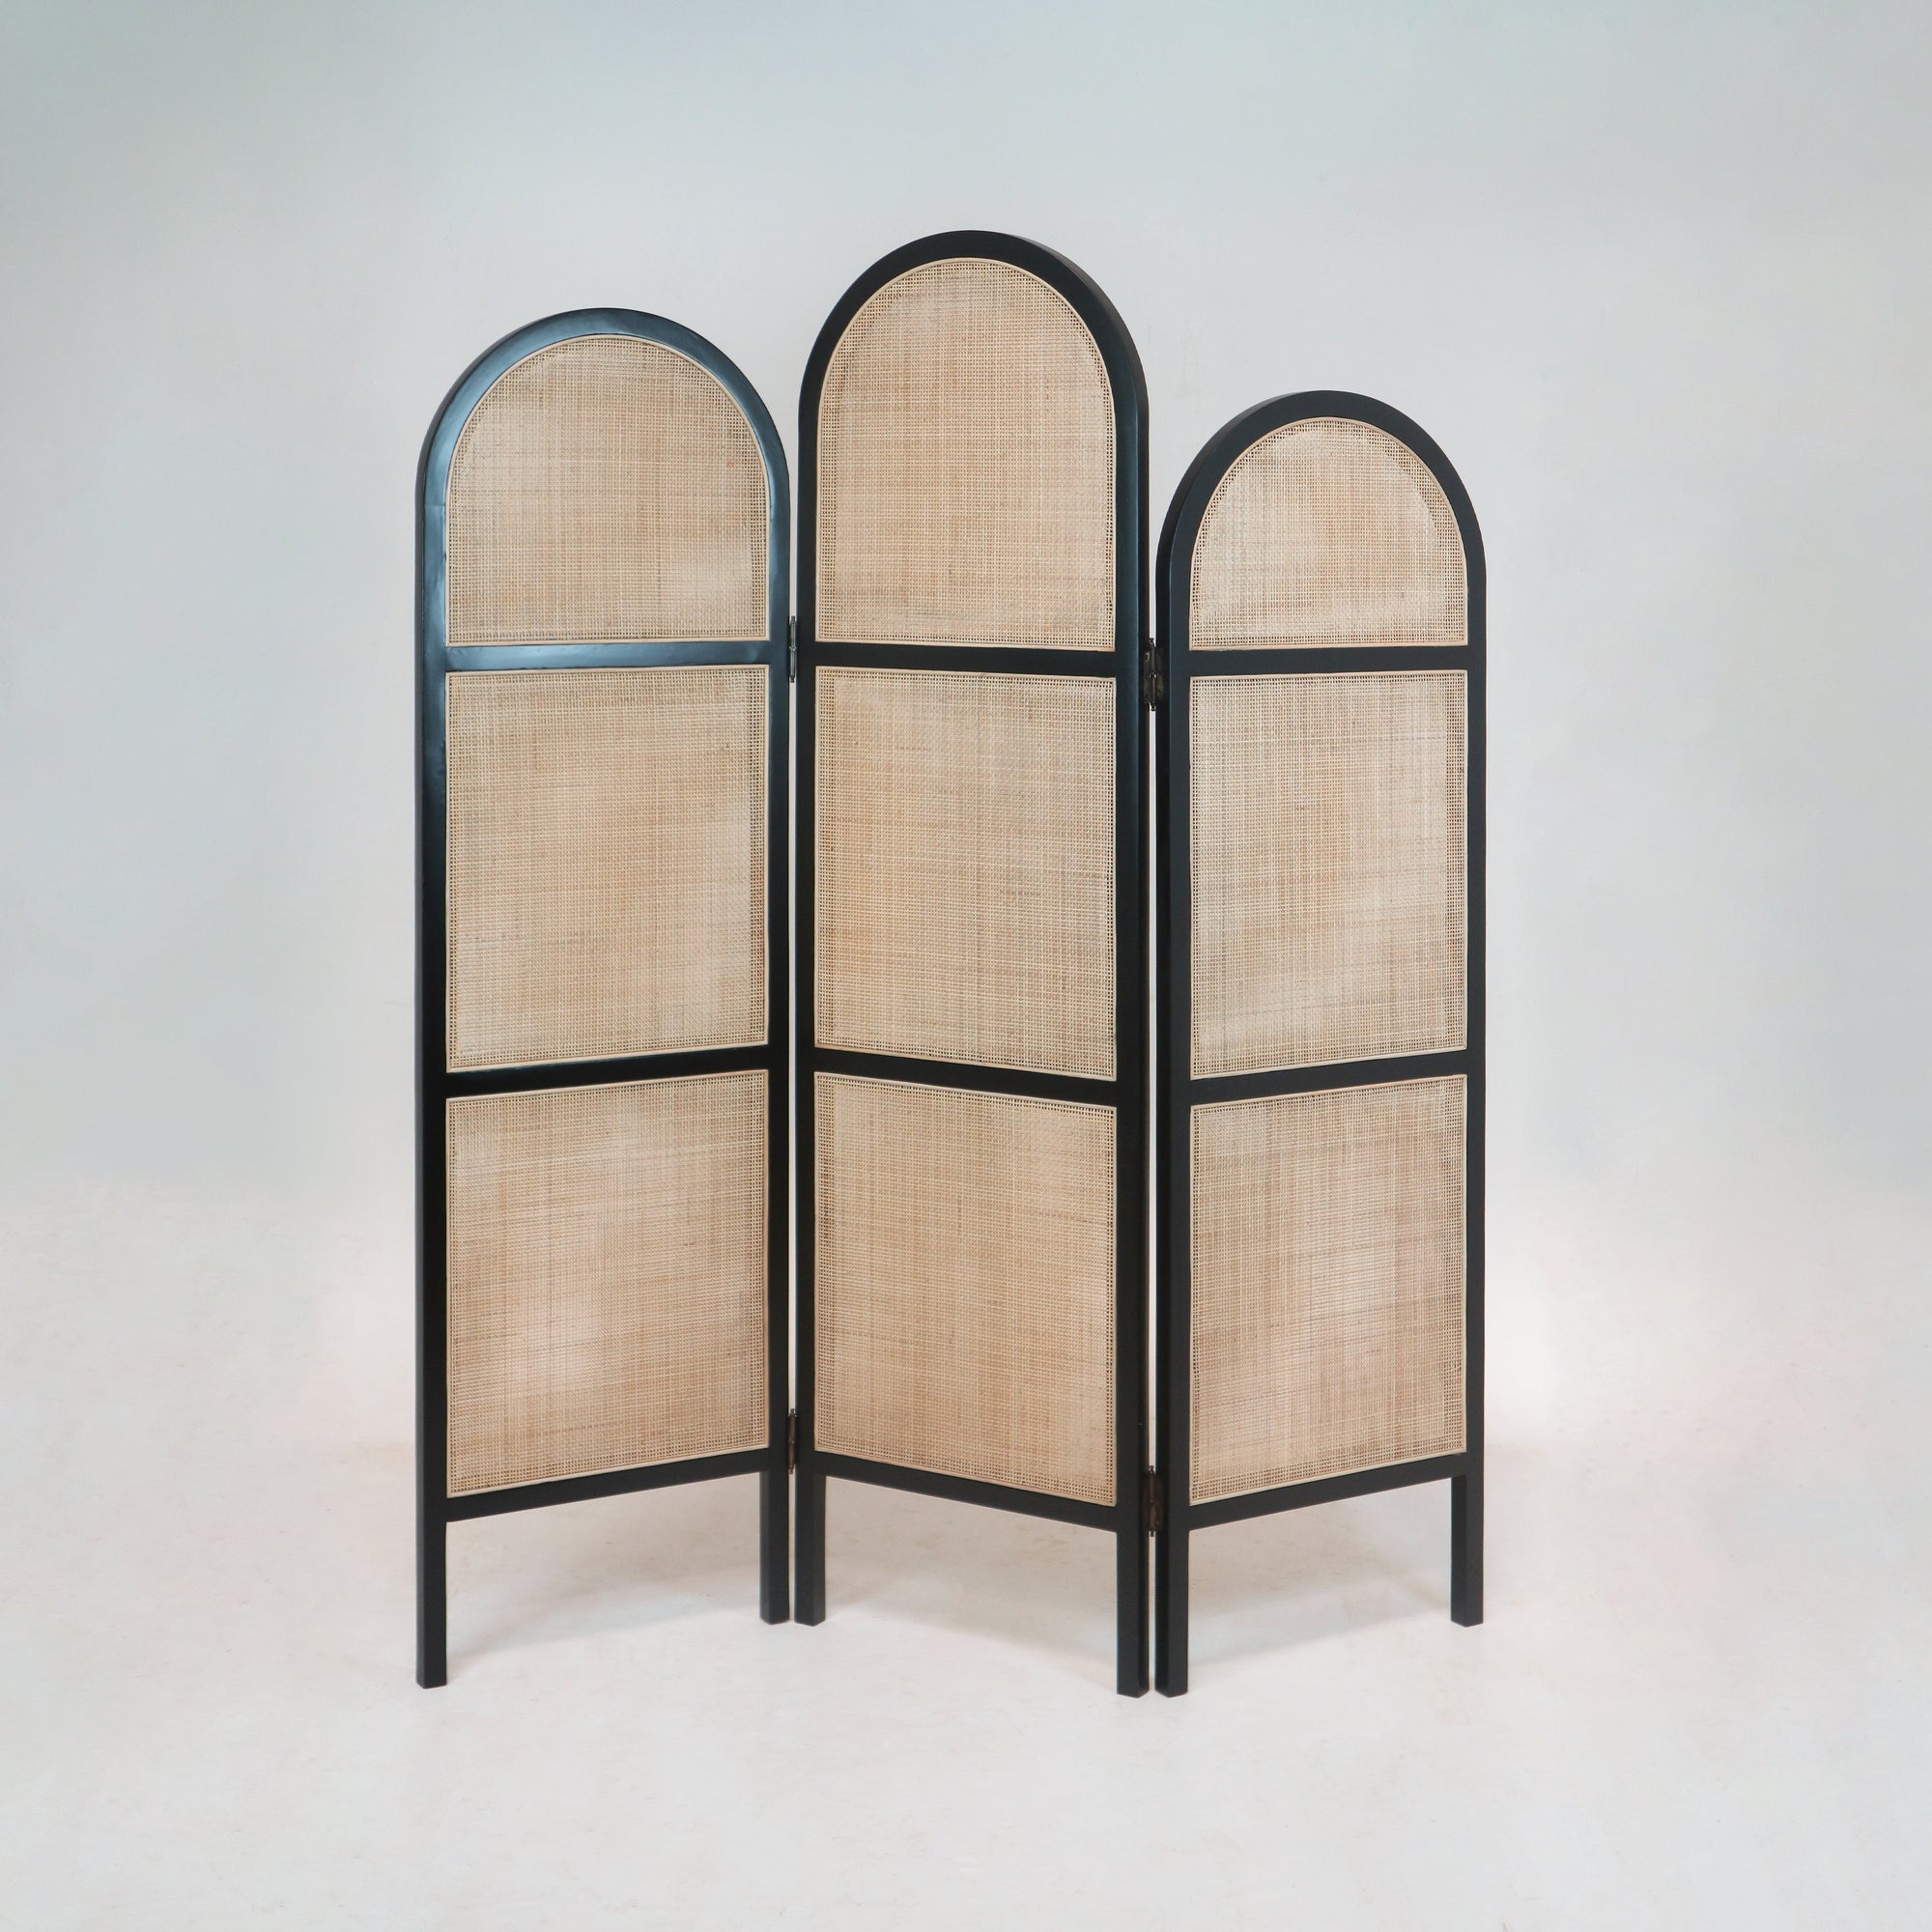 Solid Wood and Rattan Room Divider in Black Gloss